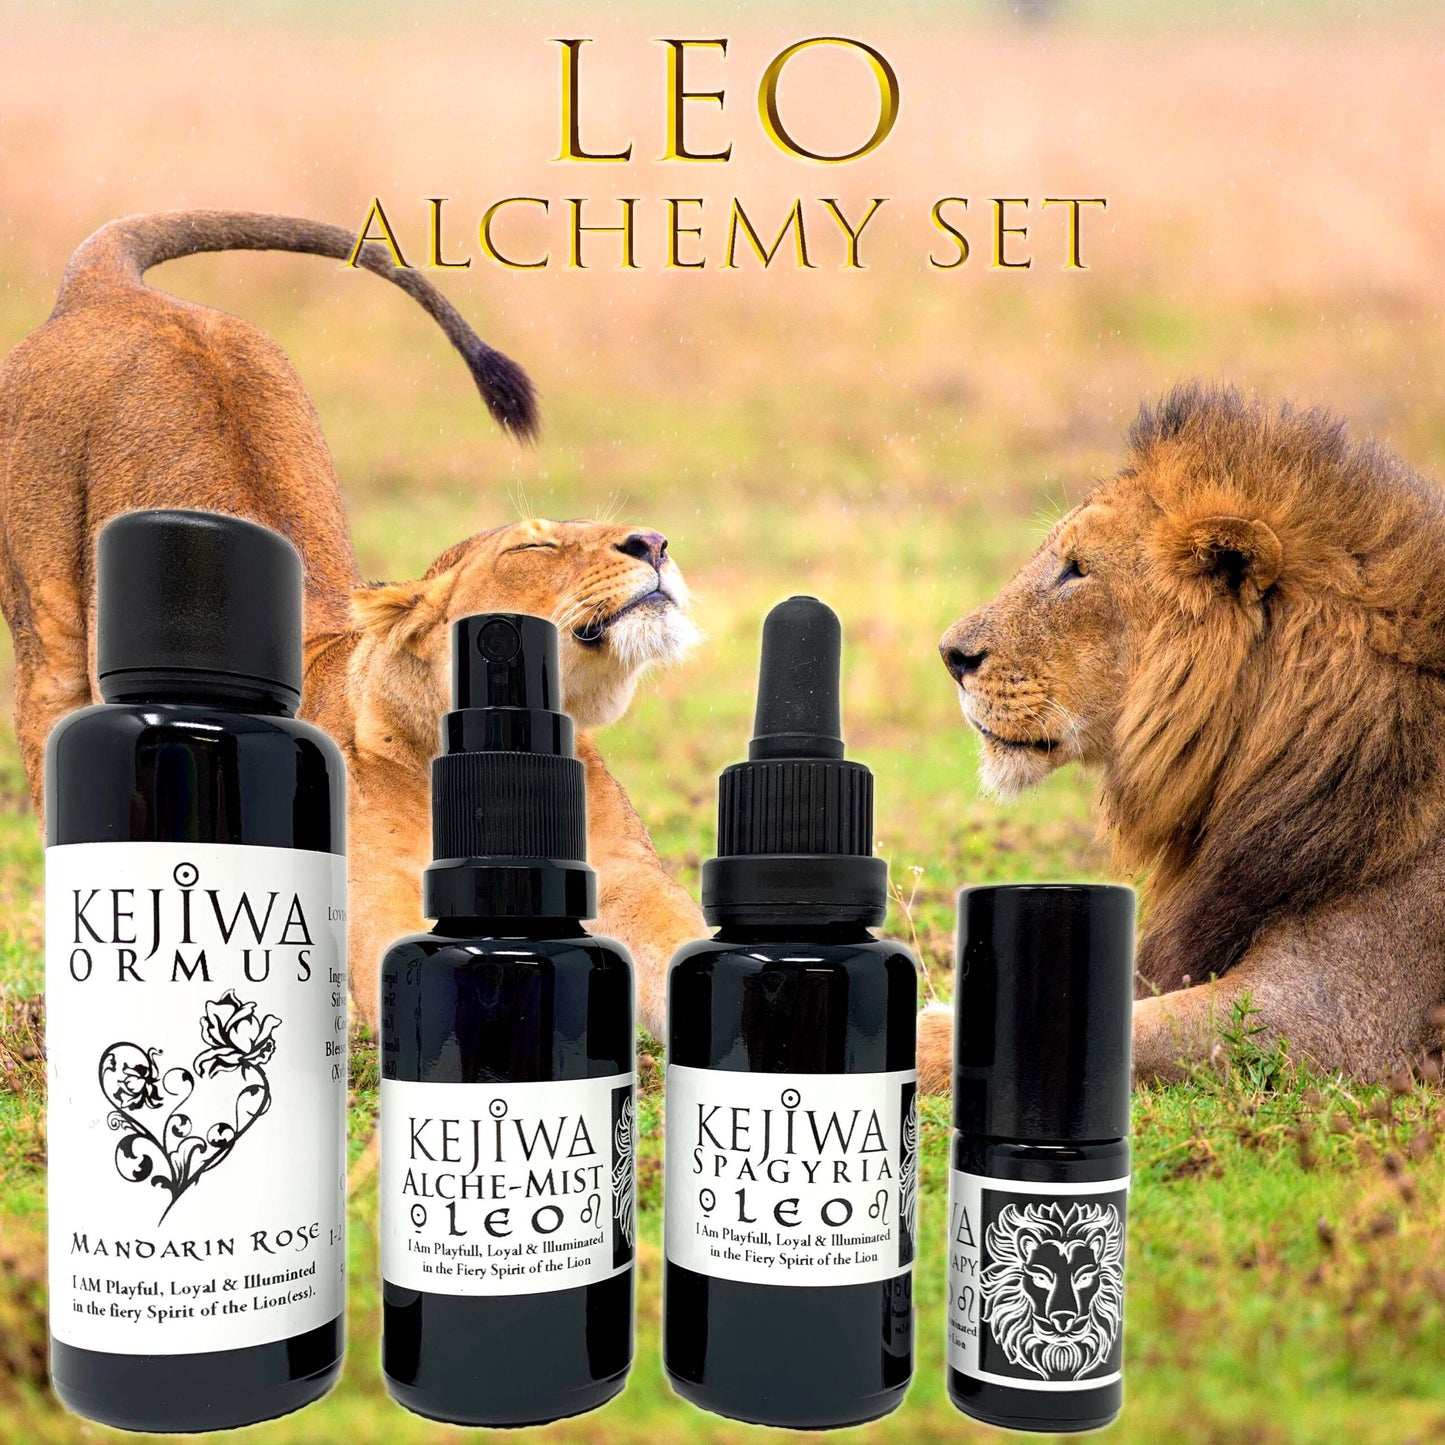 Leo Alchemy set in Violet bottles with lion and Lioness